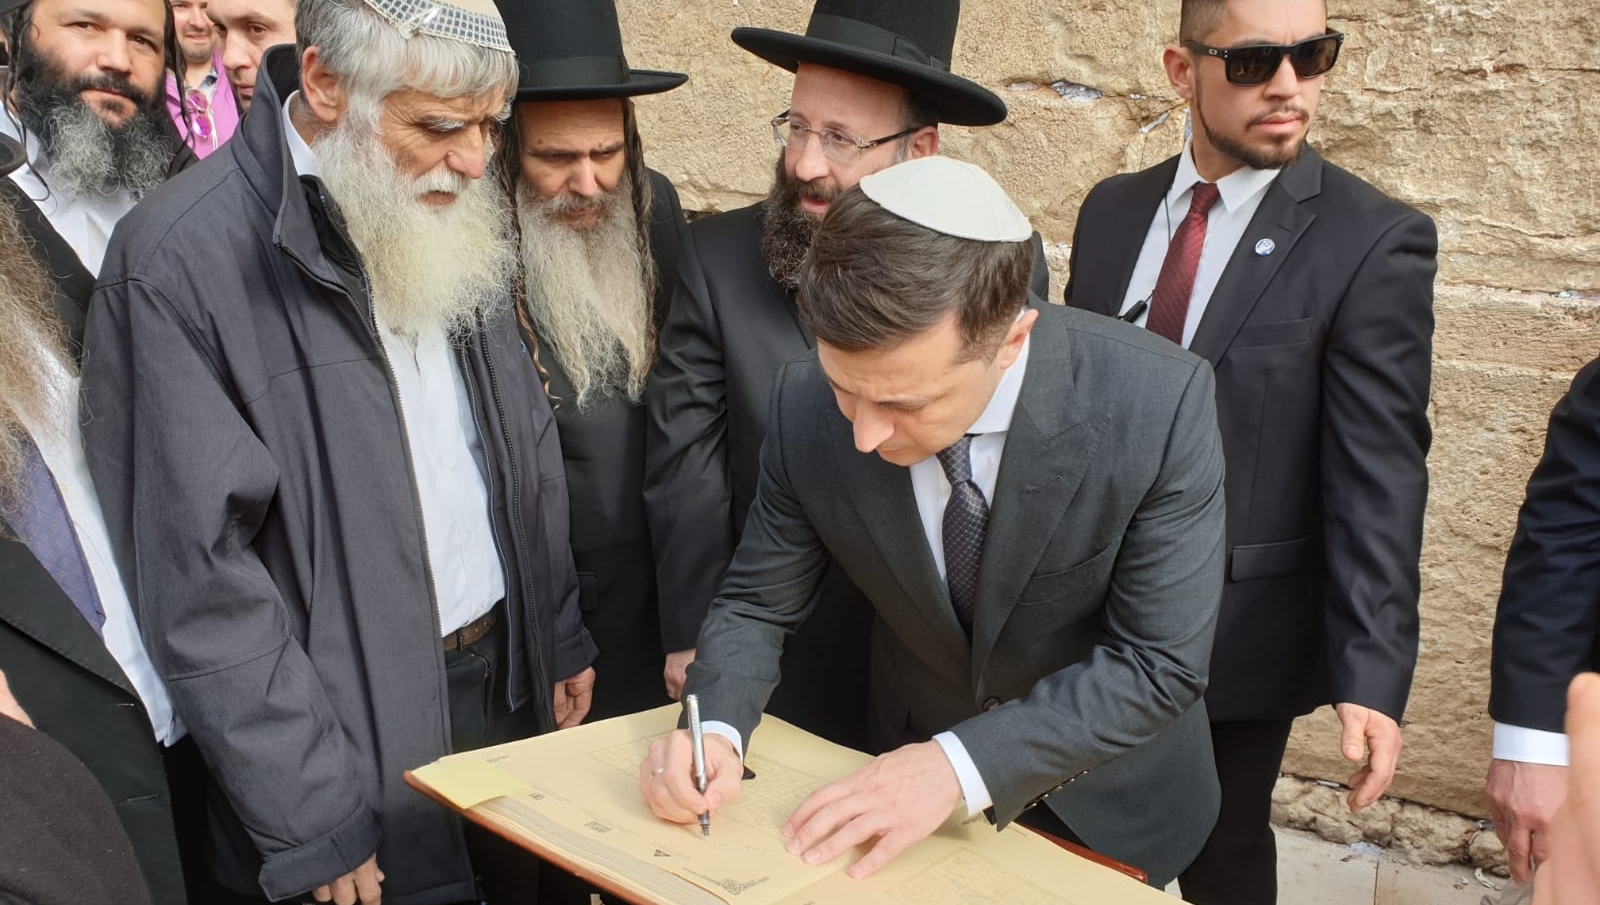 A U.S. State Department dossier on Russian disinformation will feature this photo of Ukraine President Volodymyr Zelensky at the Western Wall in Jerusalem, Jan. 23, 2020. (Office of the Ukraine President)